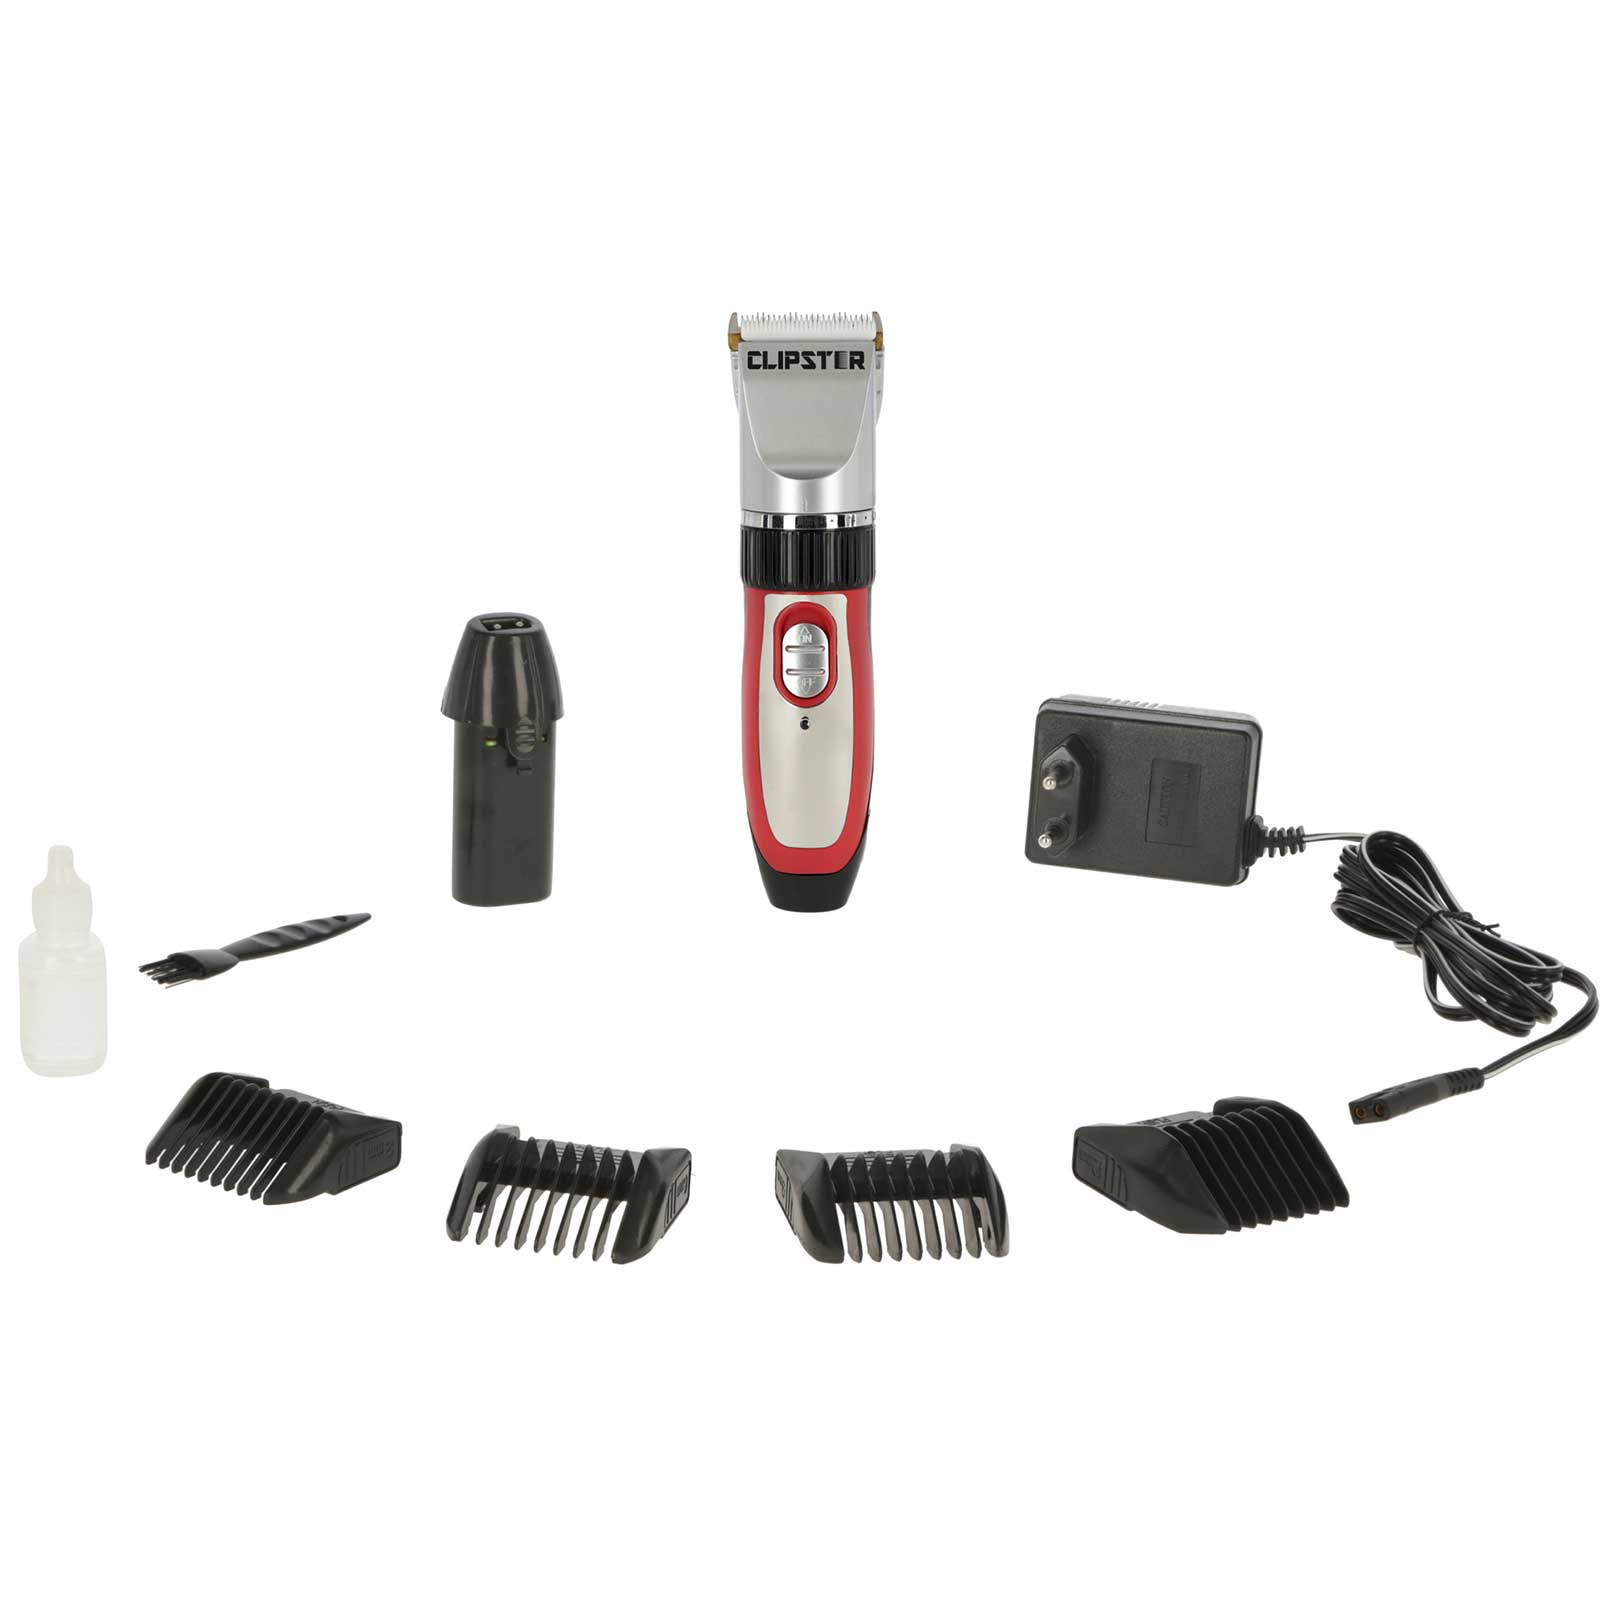 Clipster Sonic Clipper 1x battery